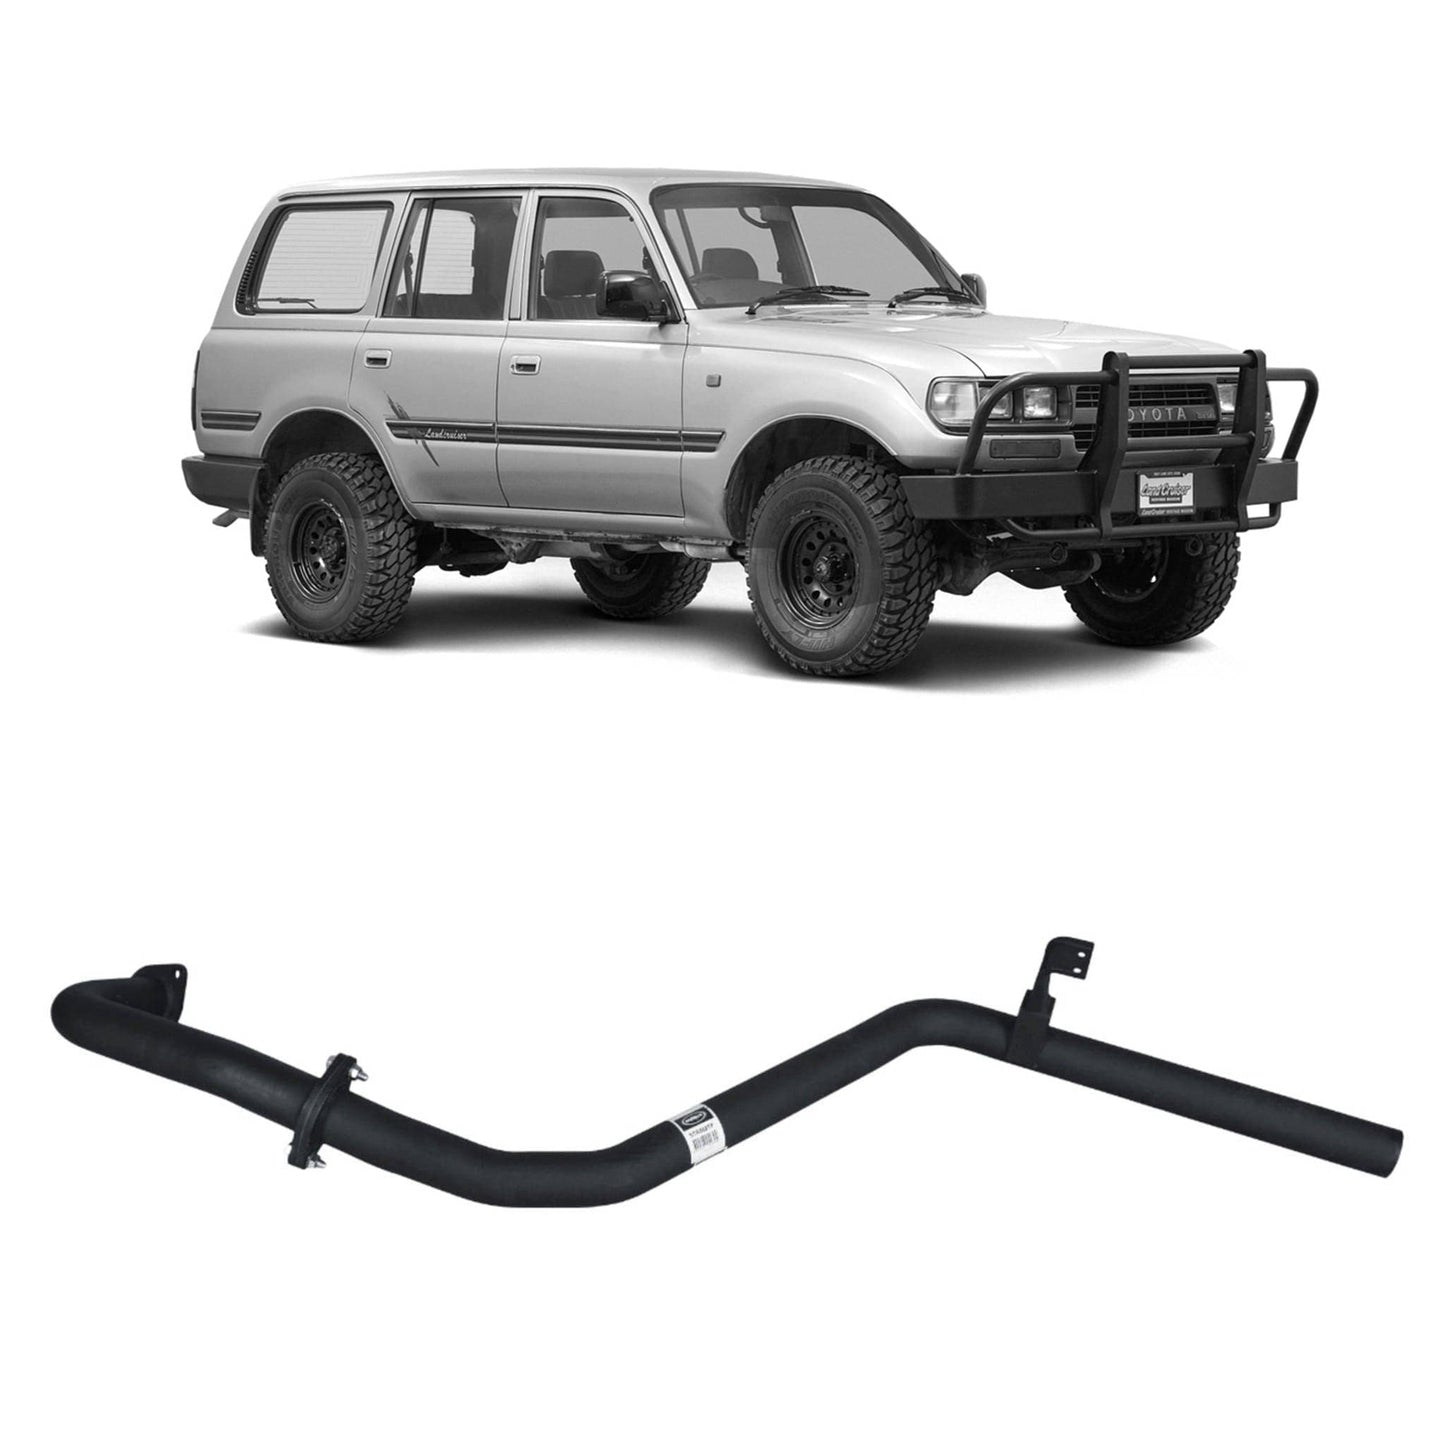 Redback Performance Tailpipe Assembly for Toyota Landcruiser 80 Series Wagon 4.2L 1HZ & 4.5L FZ (01/1990 - 02/1998)